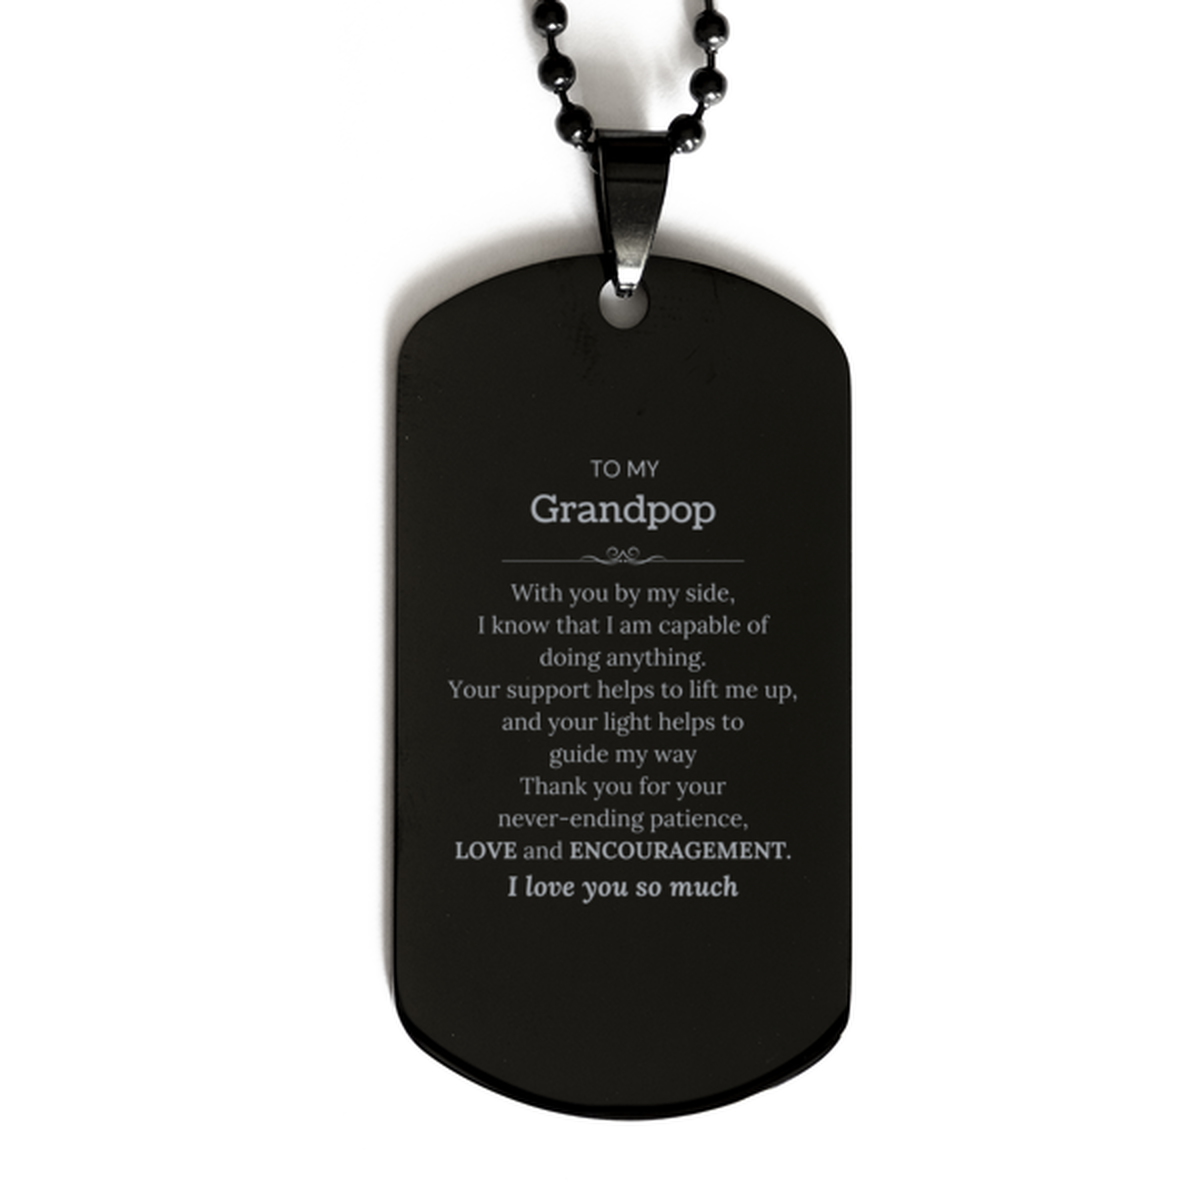 Appreciation Grandpop Black Dog Tag Gifts, To My Grandpop Birthday Christmas Wedding Keepsake Gifts for Grandpop With you by my side, I know that I am capable of doing anything. I love you so much